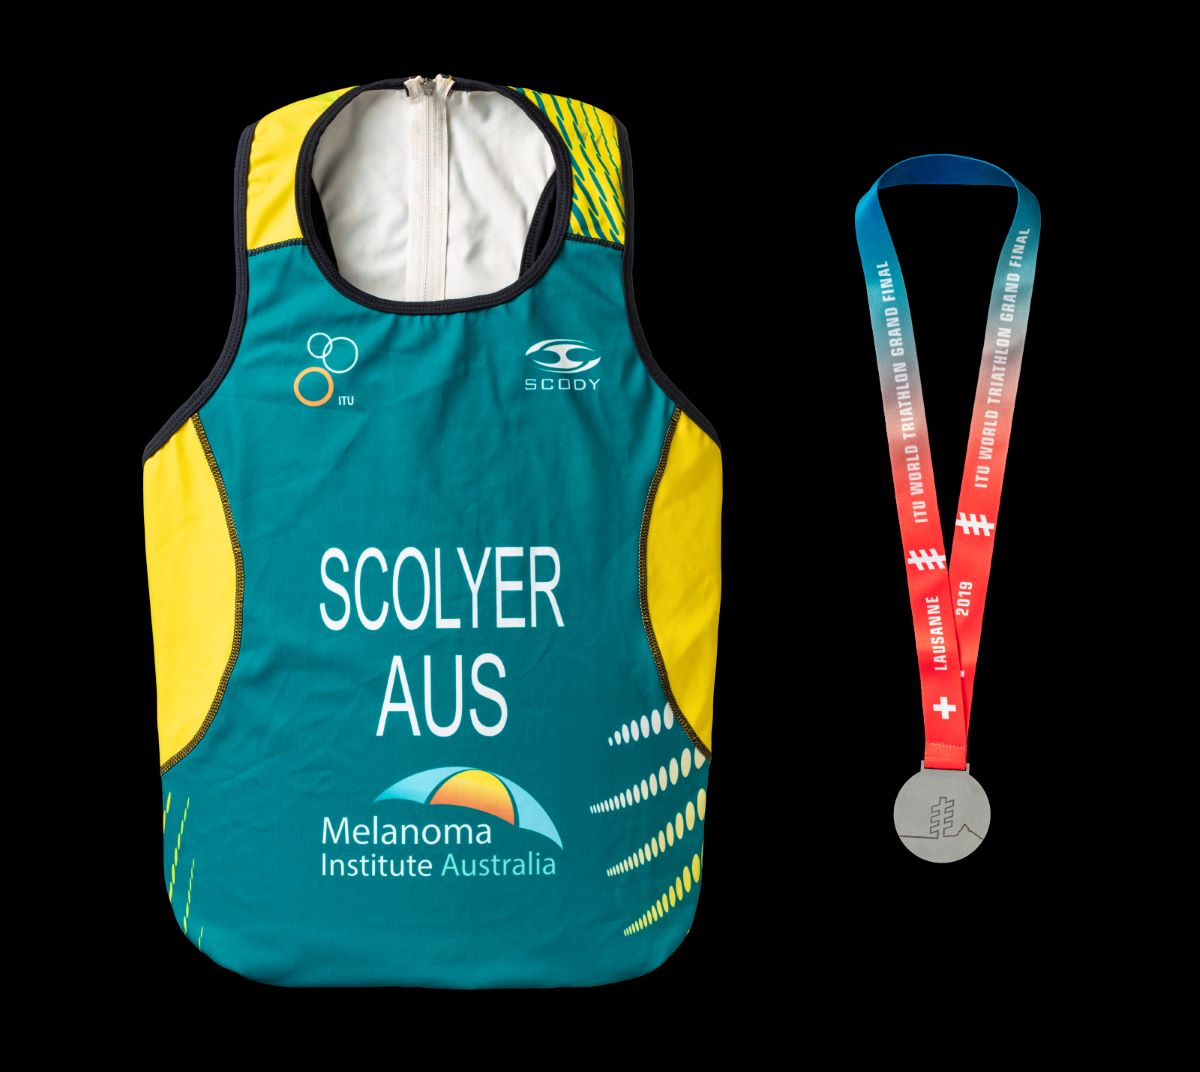 Photo of a triathlon medal and suit - click to view larger image